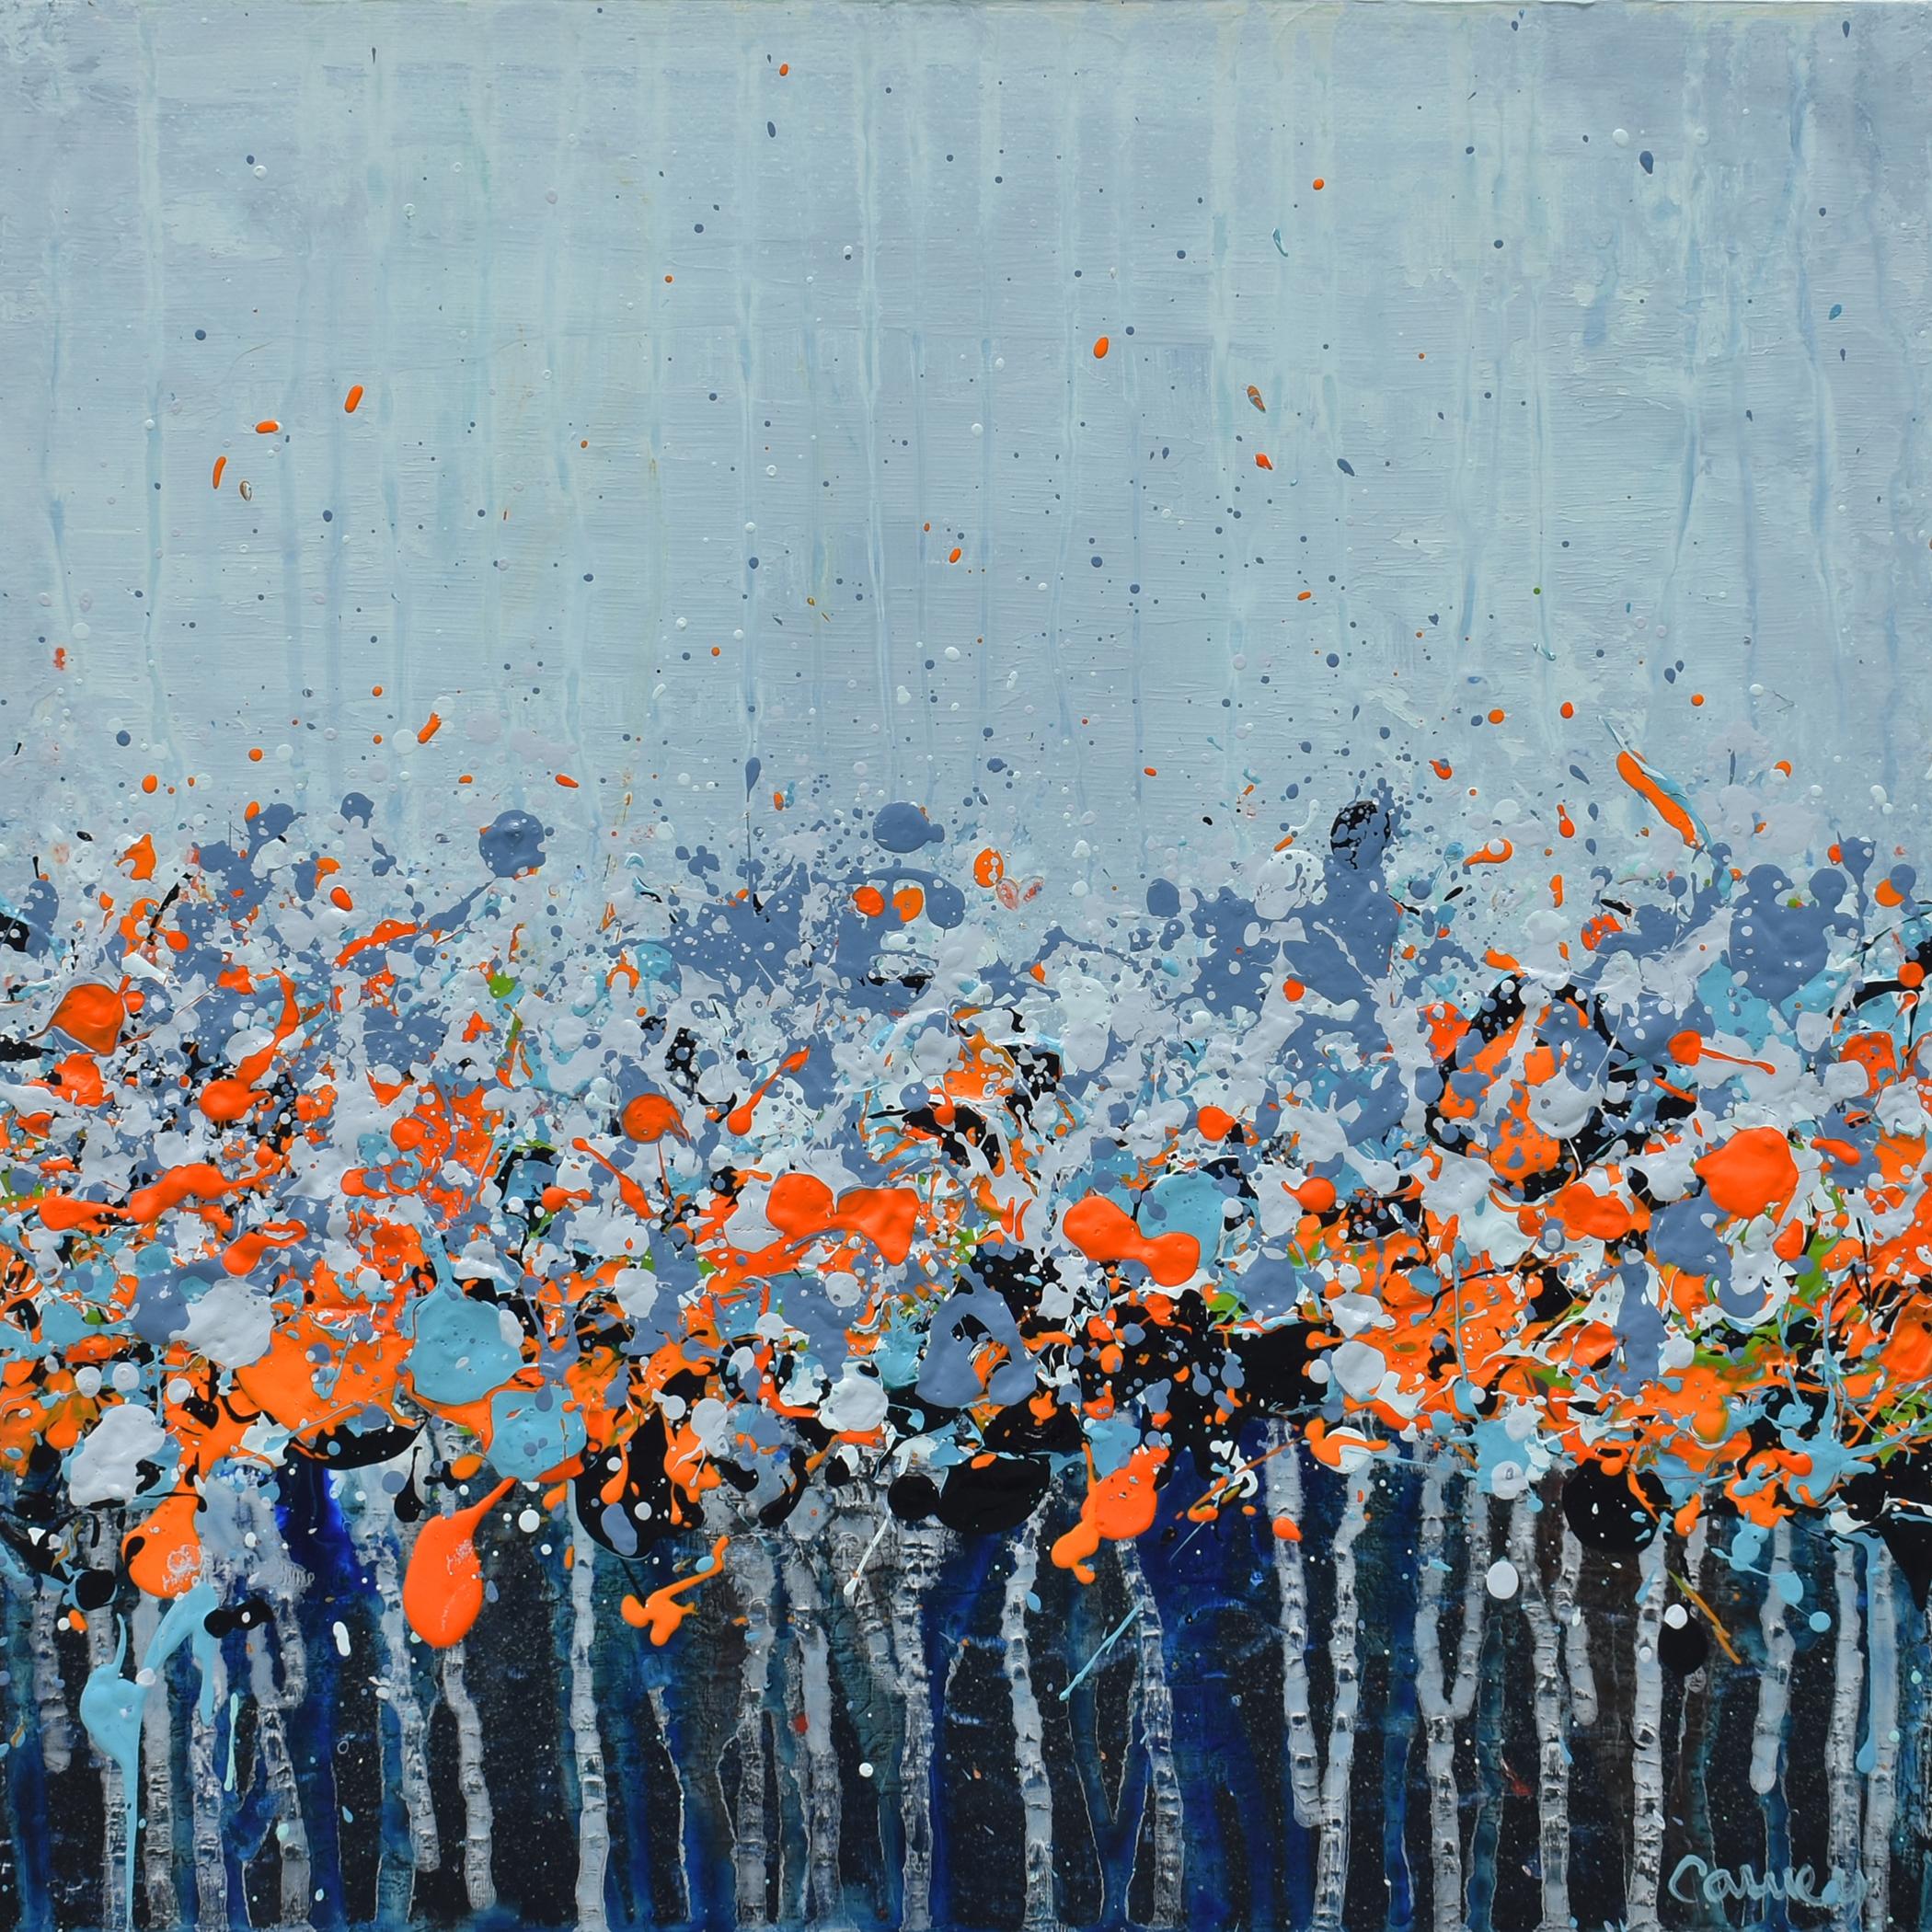 <p>Artist Comments<br />An abstract meadow unfurls with a striking balance of various shades of blue. Pops of orange complement the scene. The interplay of colors creates a dynamic sense of movement and vitality, echoing the vibrant essence of